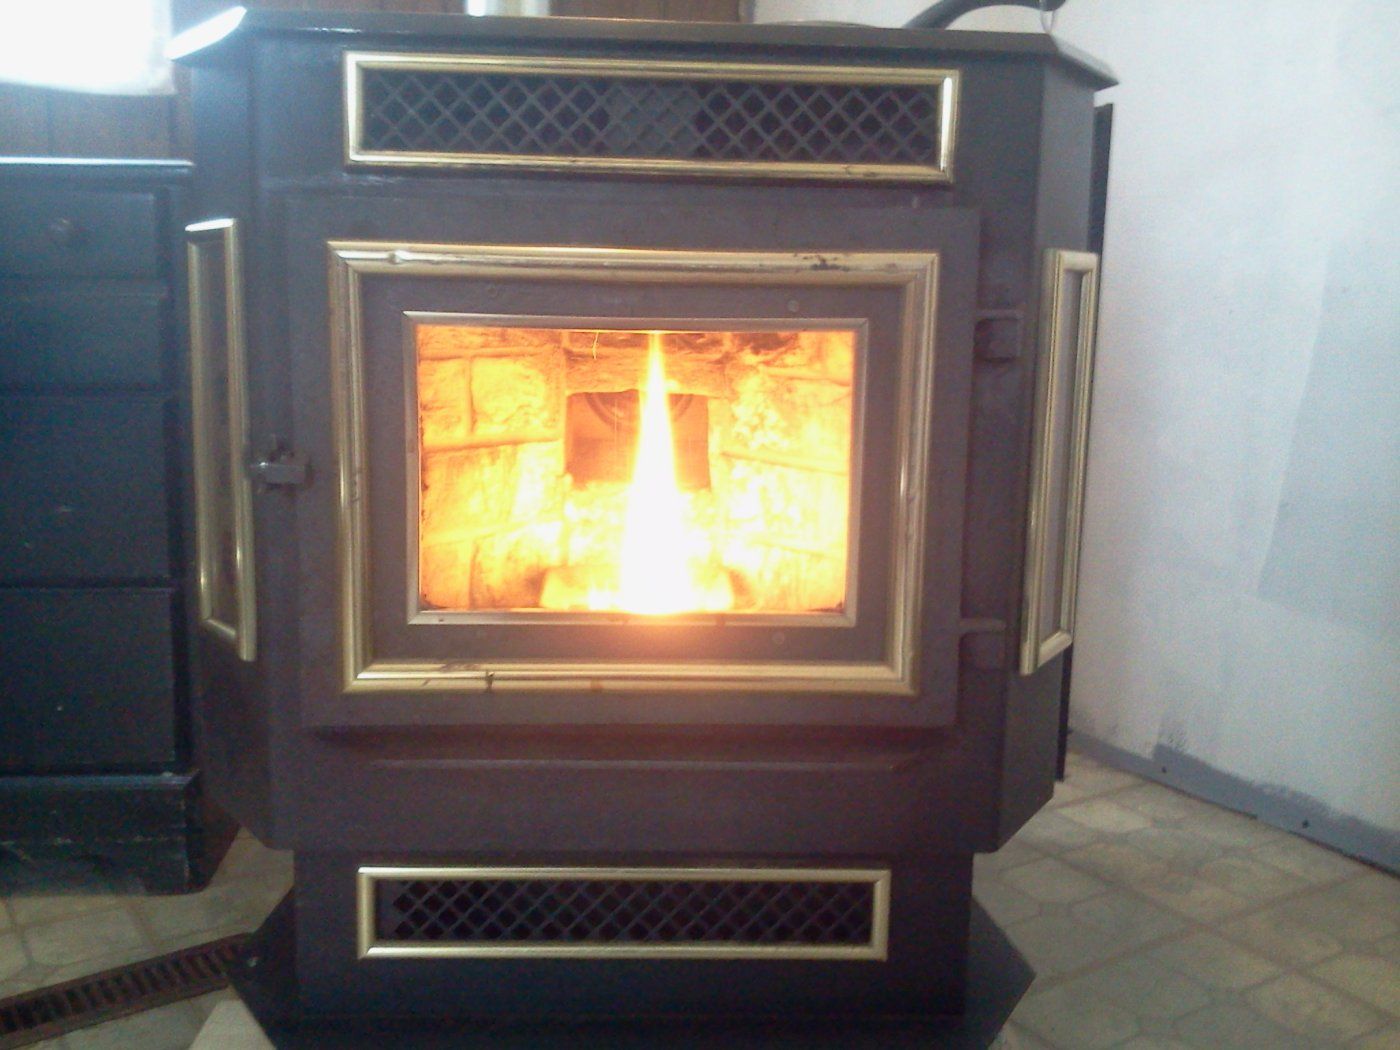 Please Help Identify This Pellet Stove Hearth Com Forums Home